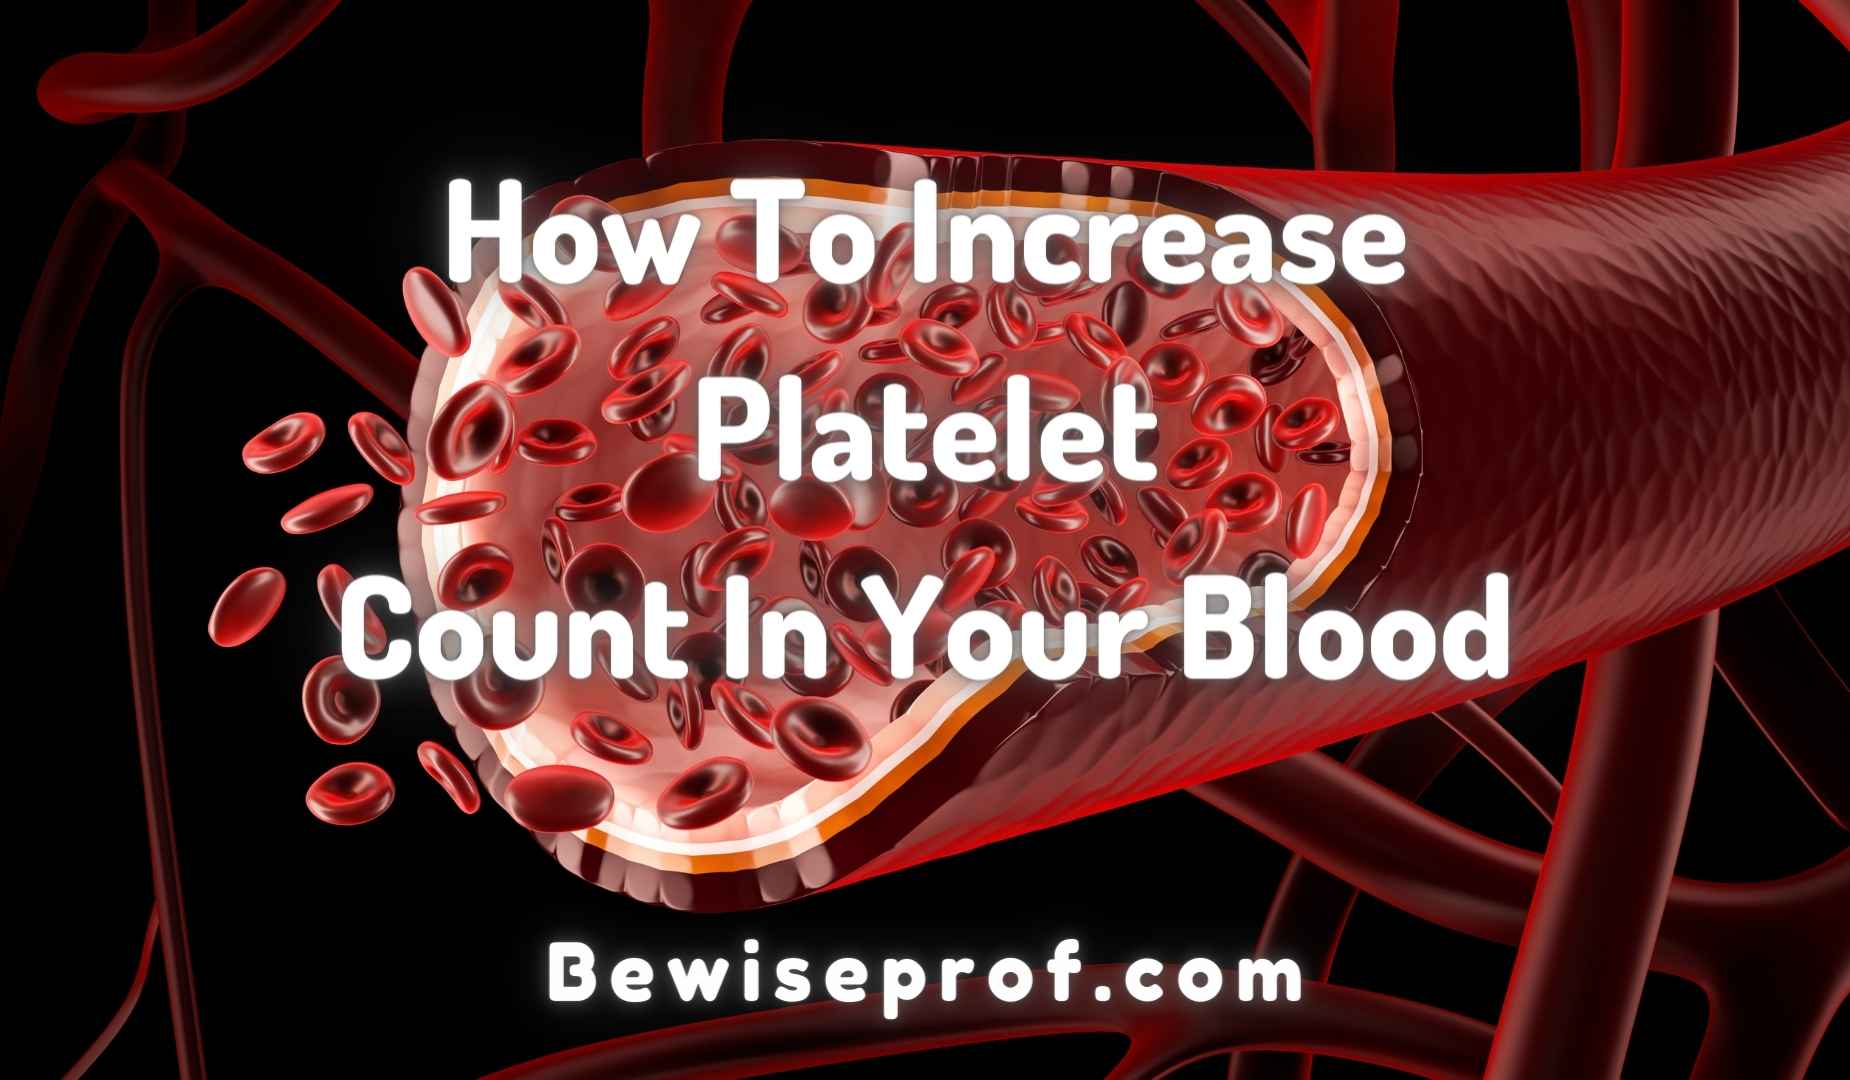 How To Increase Platelet Count In Your Blood